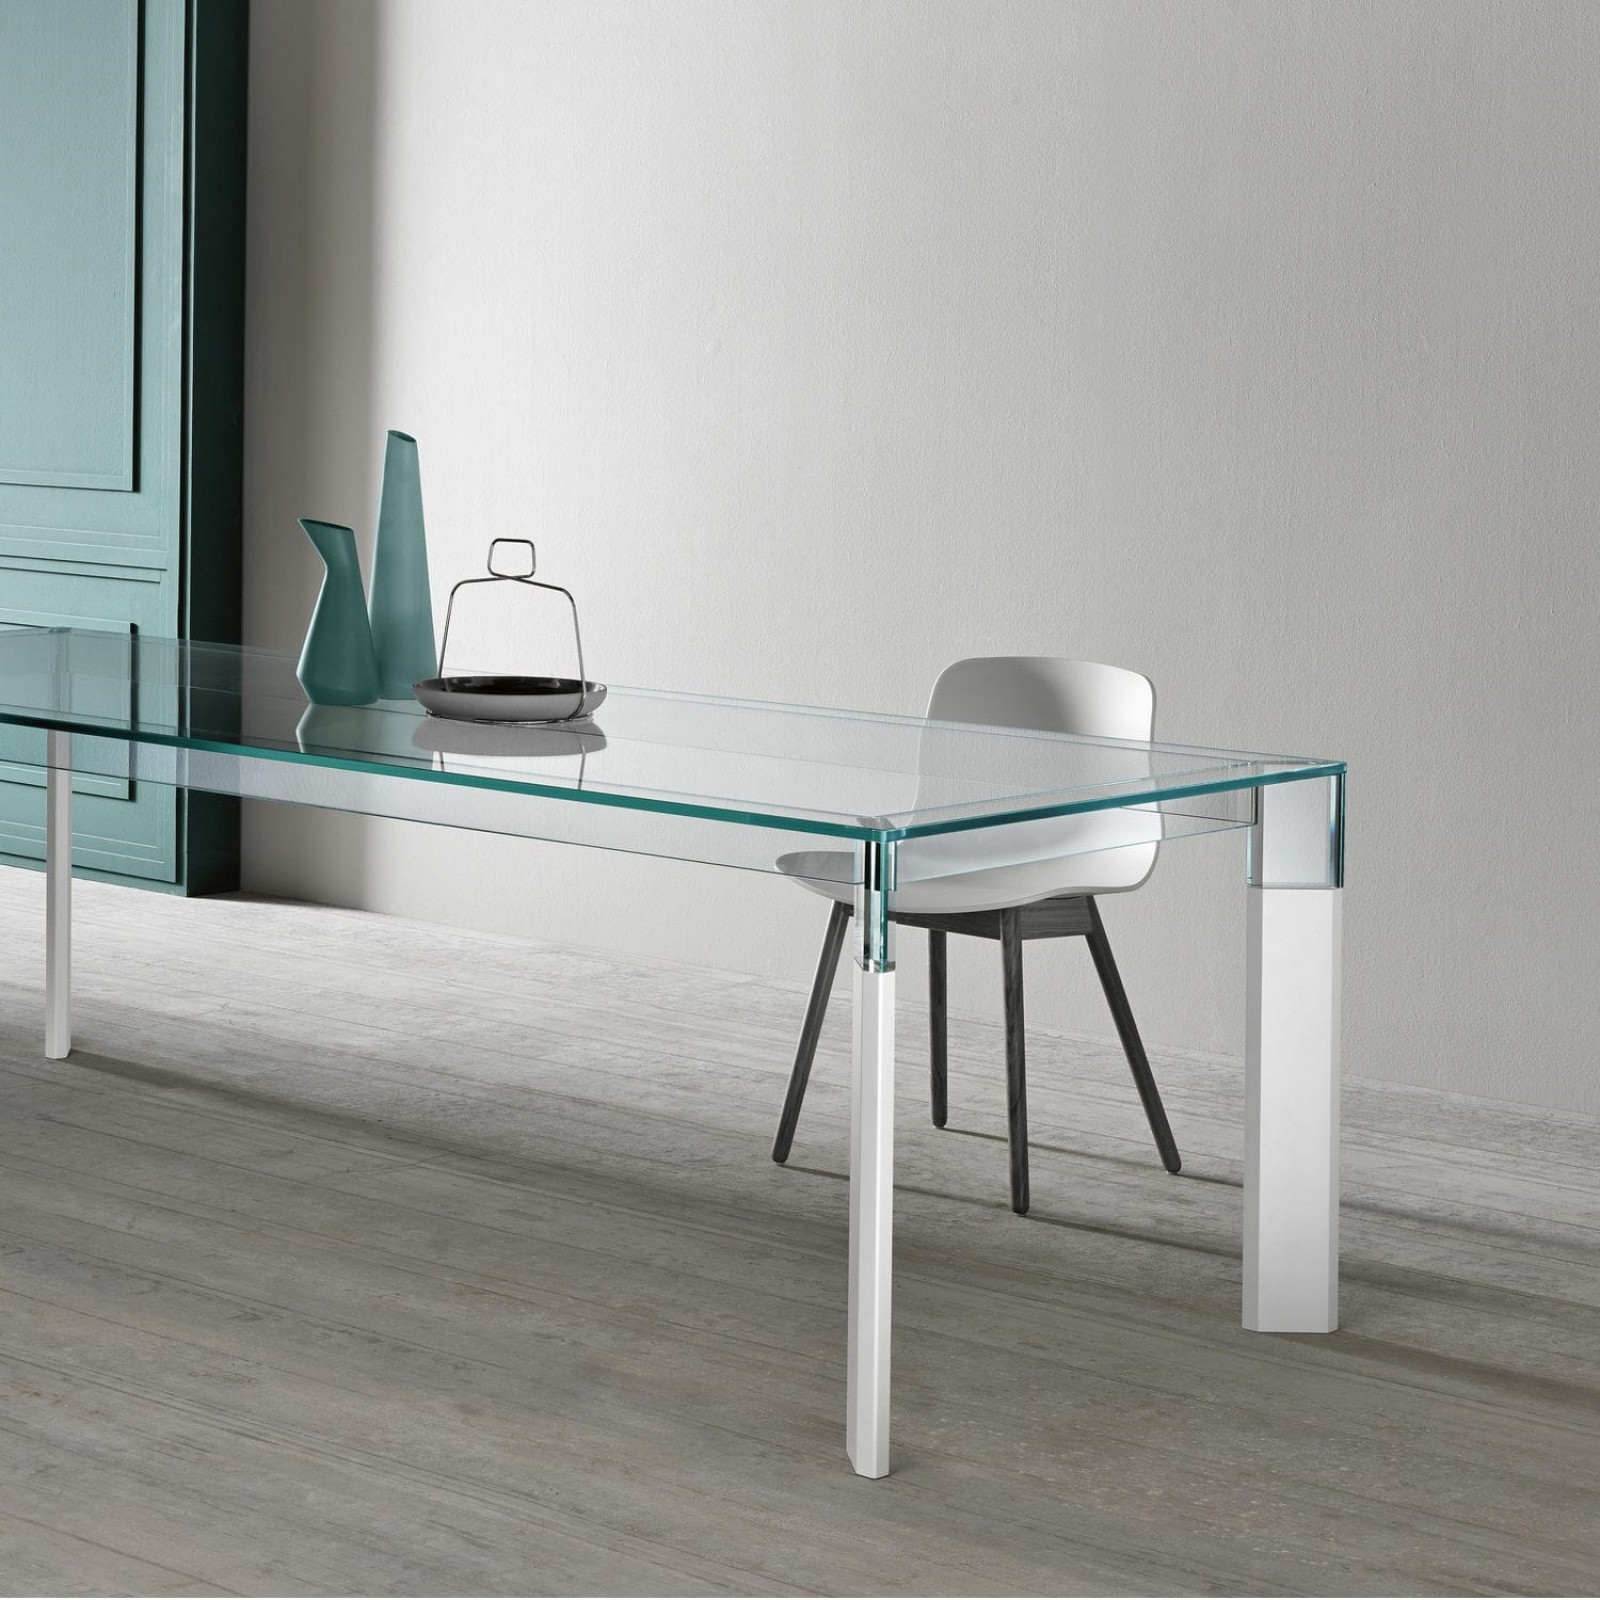 Perseo Table (White) - Tonelli Design | Design Is This